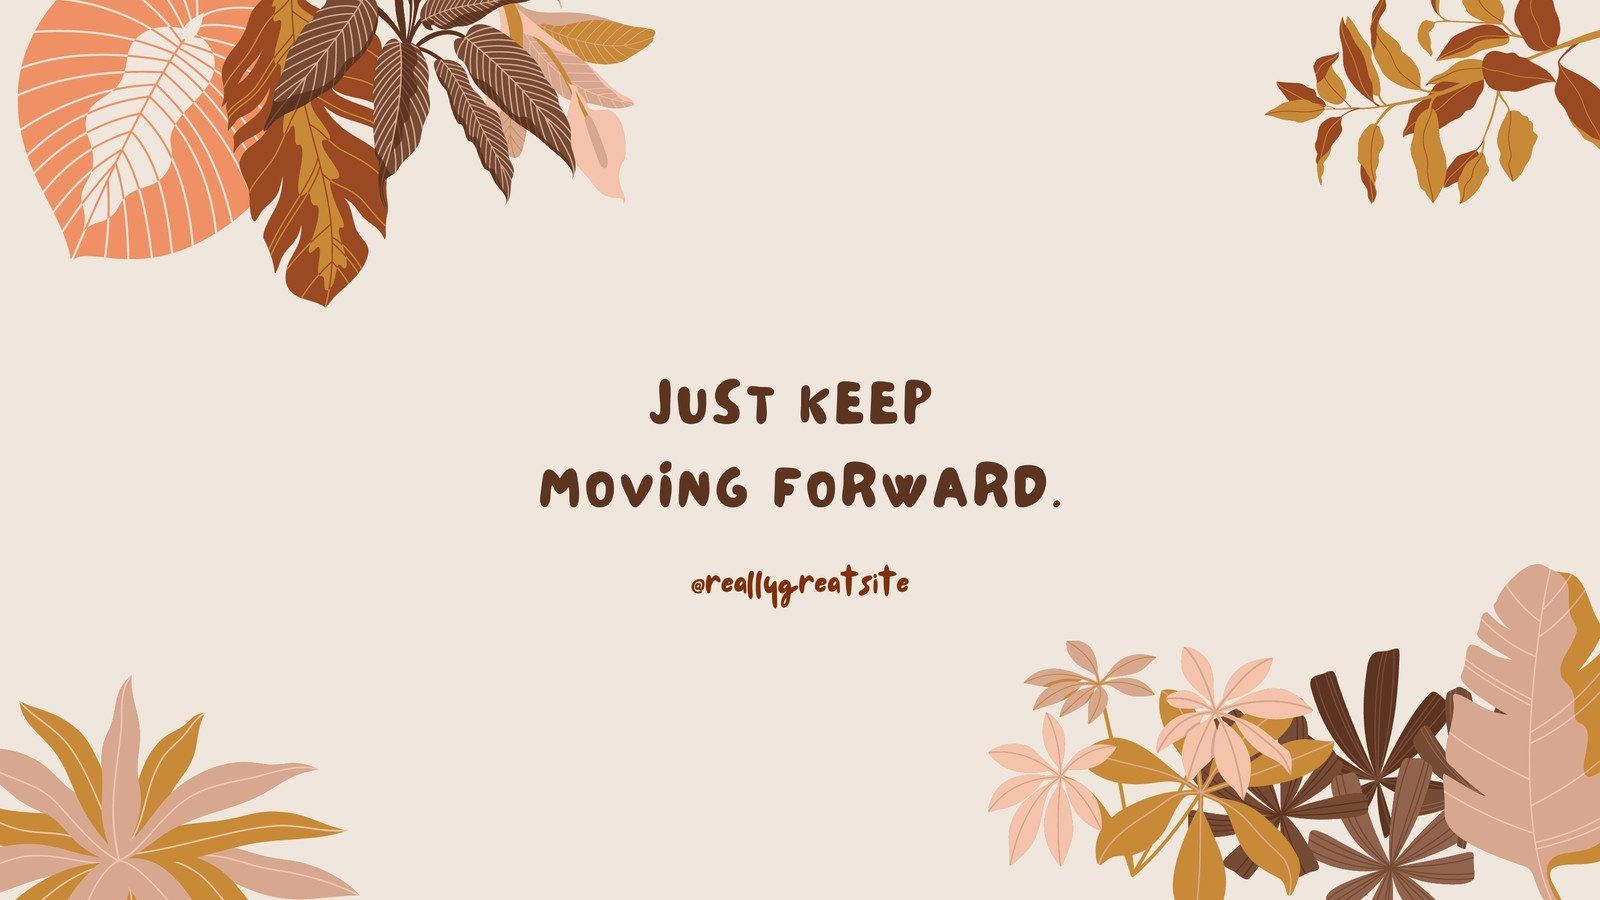 Just keep moving forward quote - Minimalist